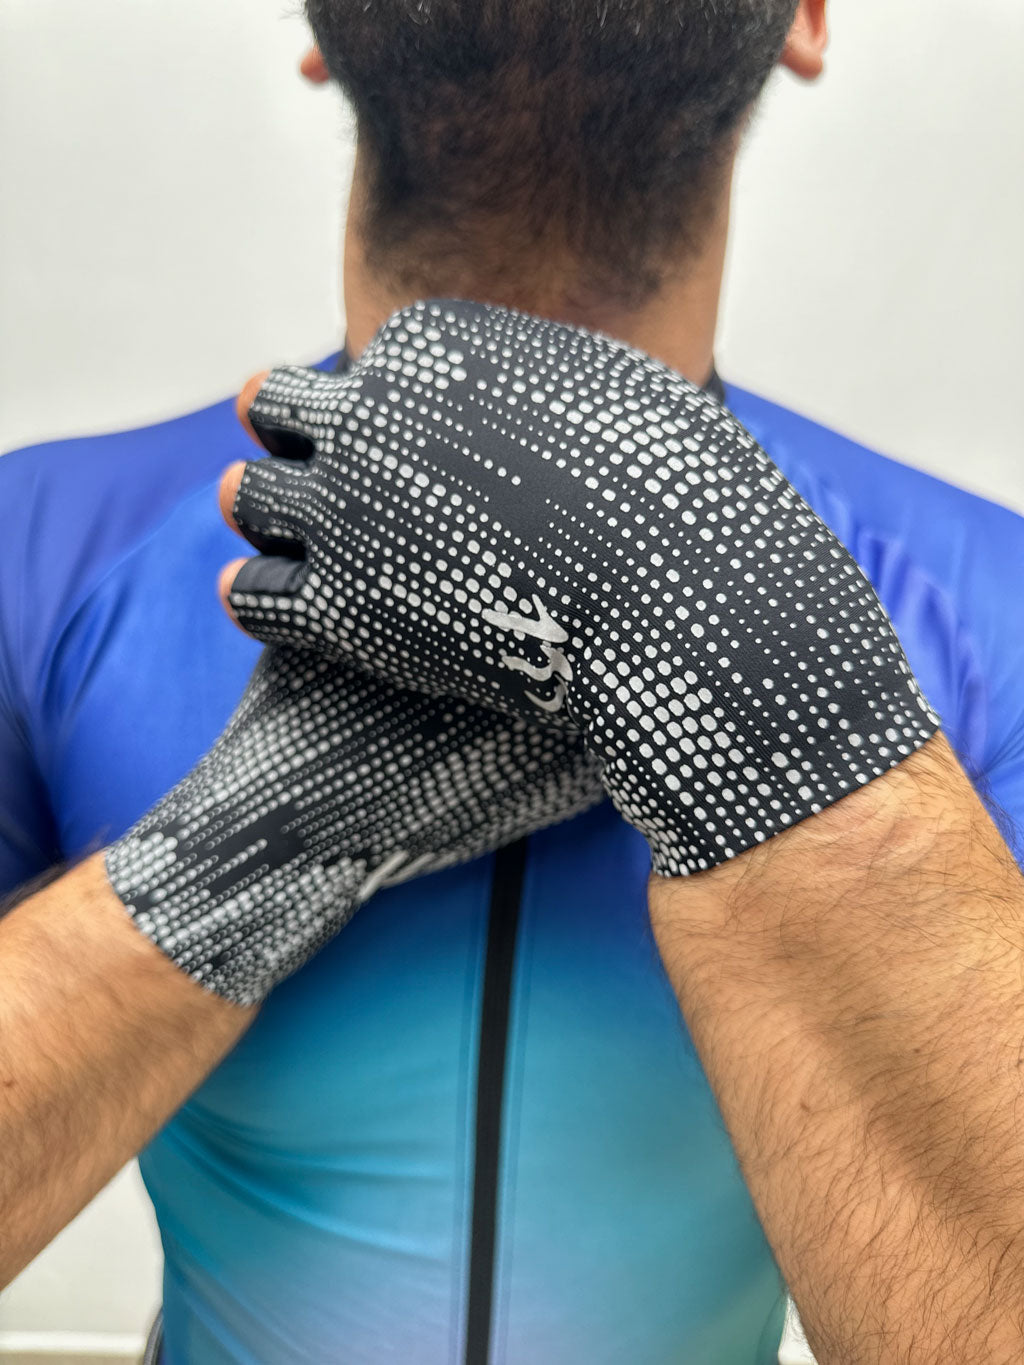 Long distance reflective gloves